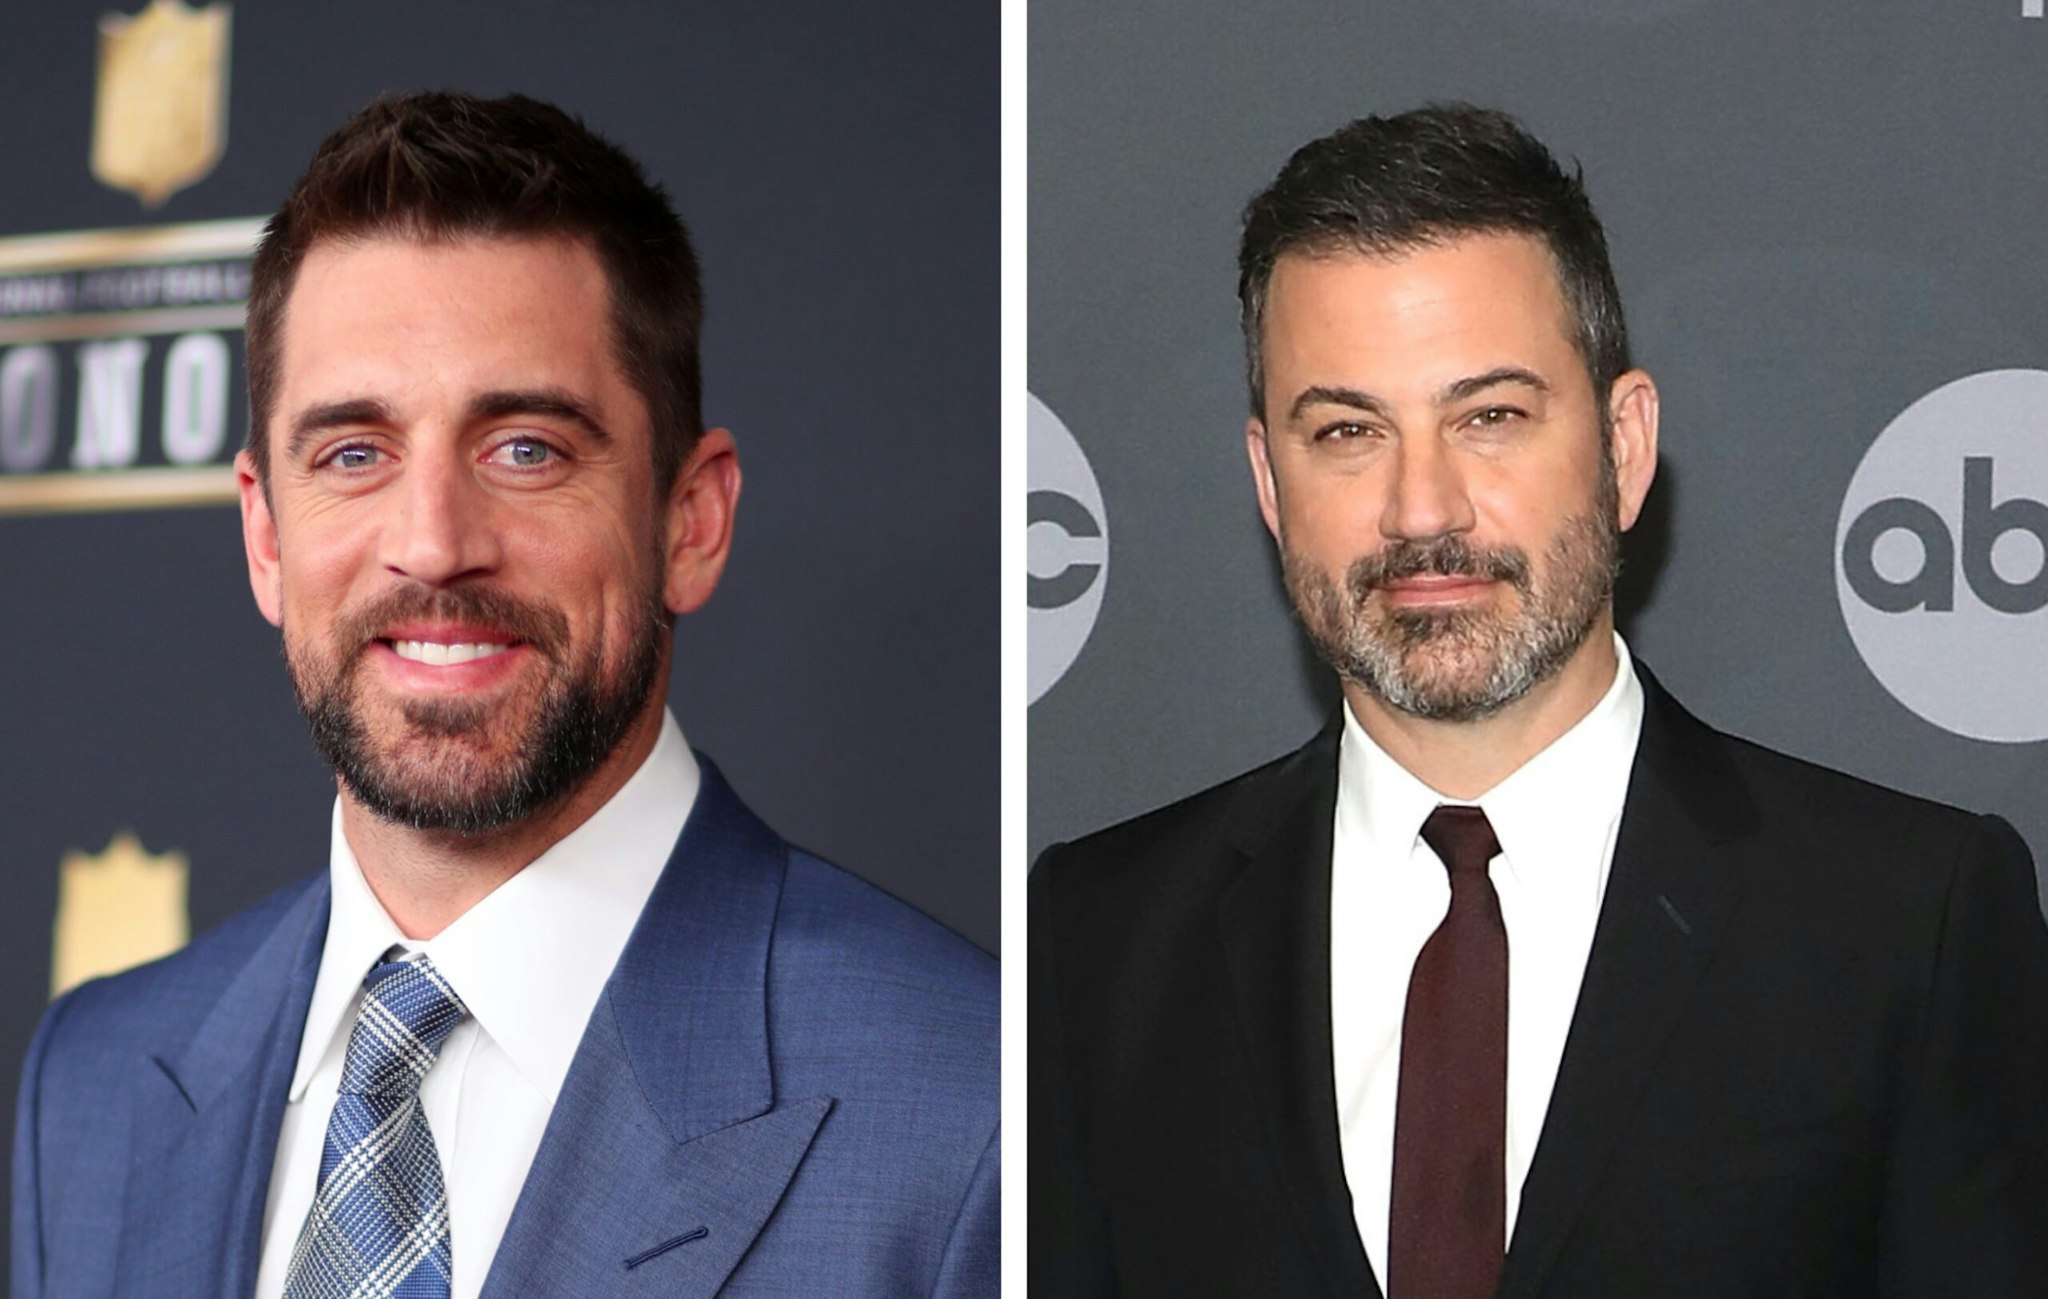 Rodgers and Kimmel